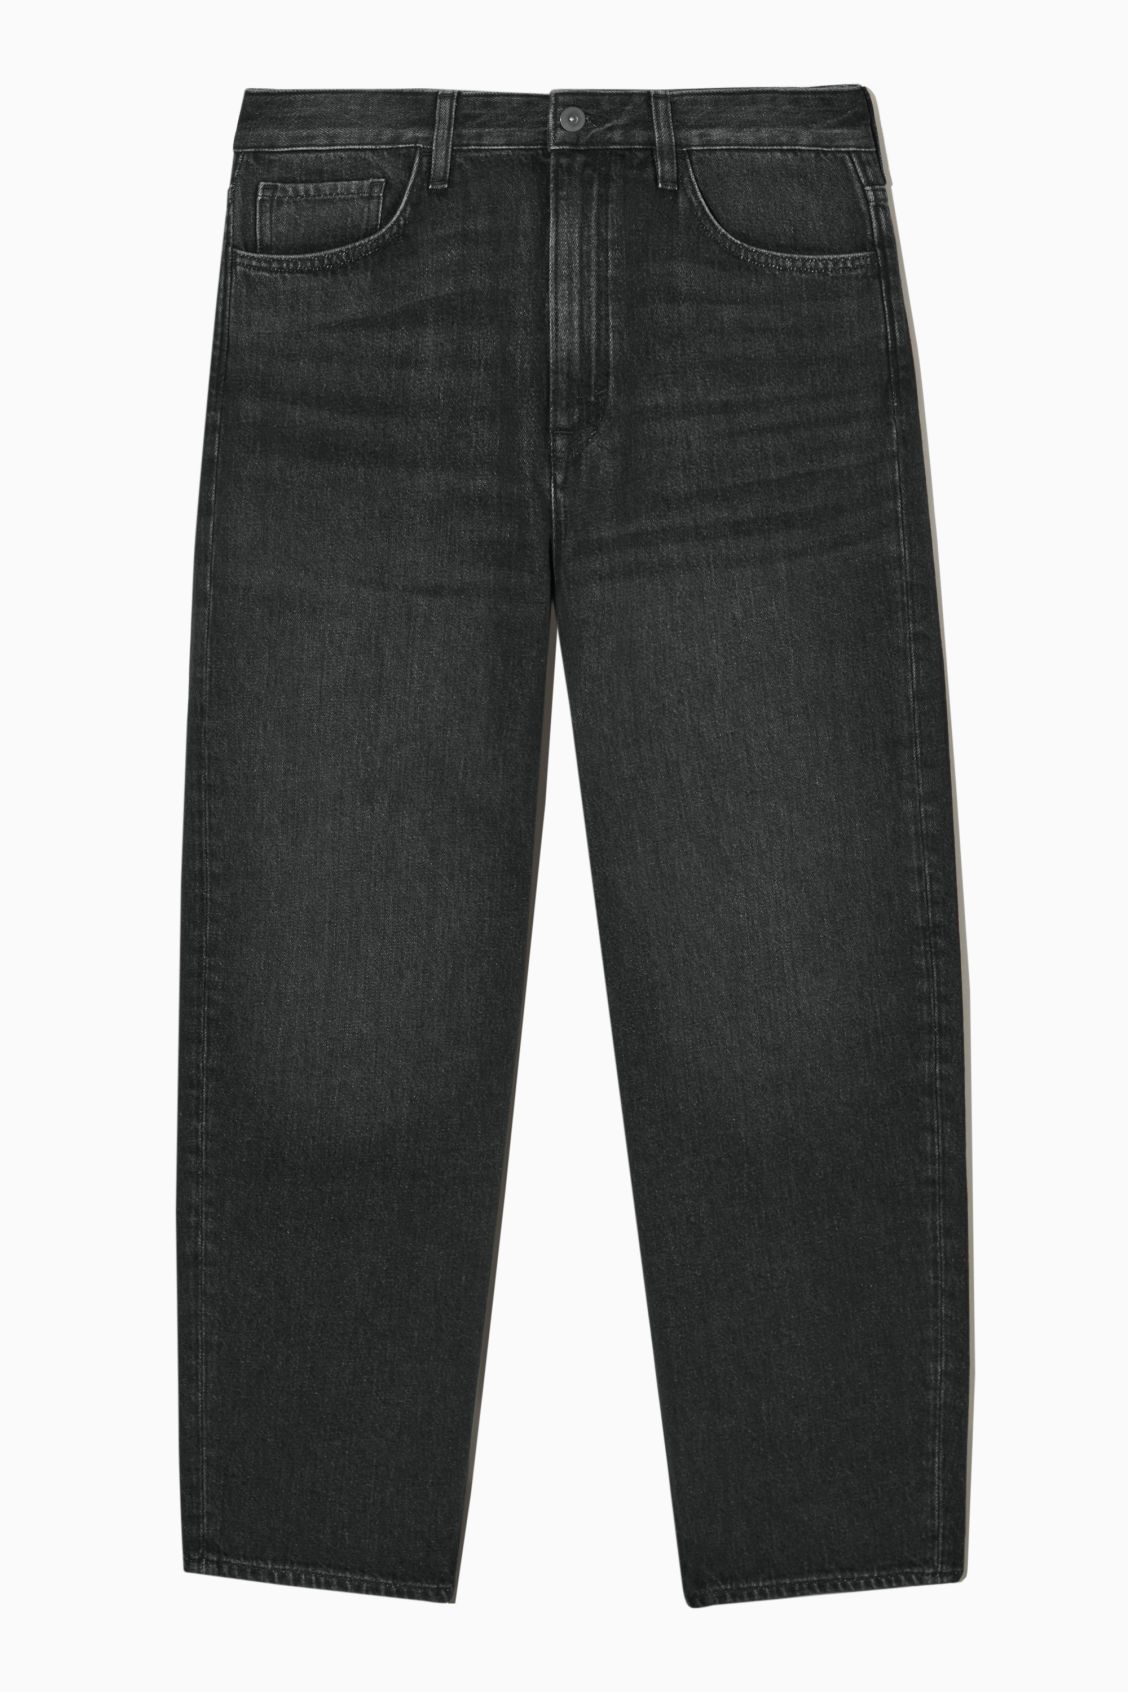 TAPERED ANKLE-LENGTH JEANS - BLACK - COS | COS UK